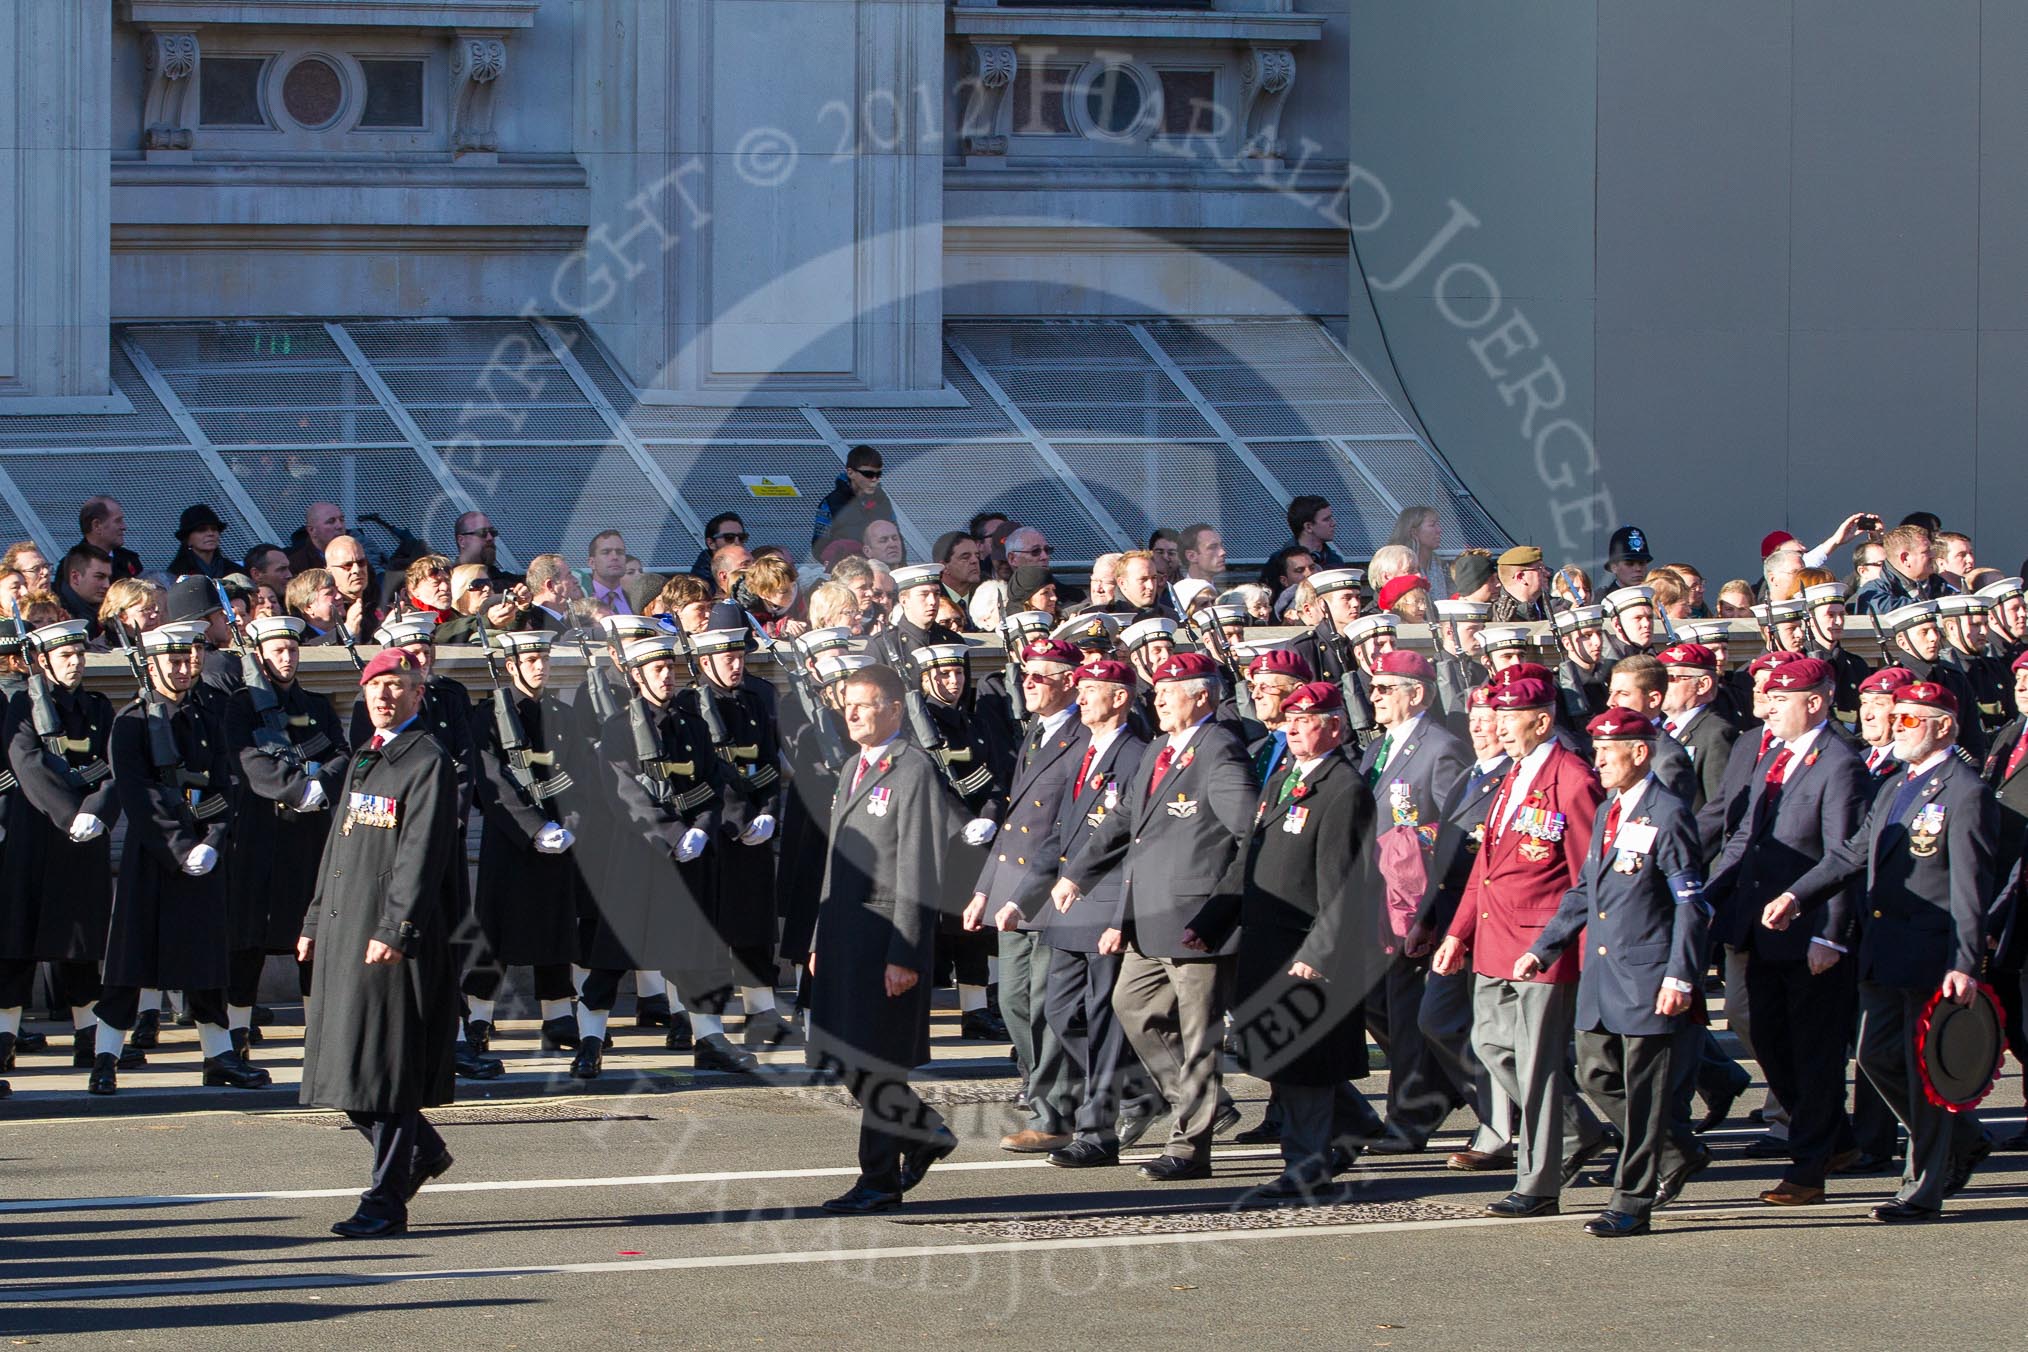 Remembrance Sunday 2012 Cenotaph March Past: Group A20 - Parachute Regimental Association..
Whitehall, Cenotaph,
London SW1,

United Kingdom,
on 11 November 2012 at 11:51, image #685